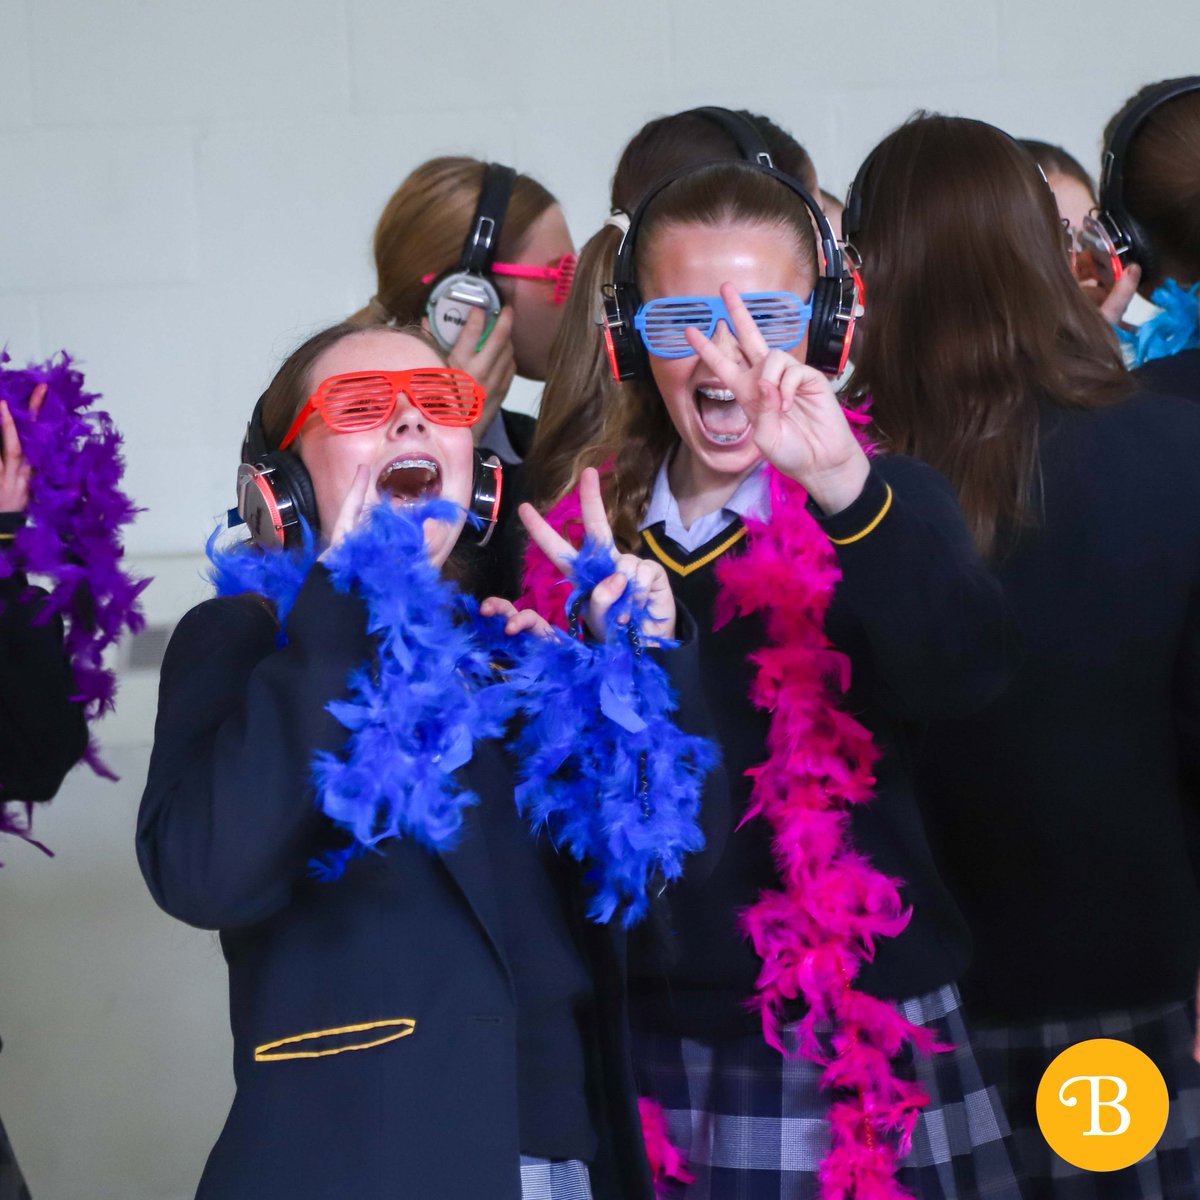 #InternationalDanceDay AND Wellbeing Month? Perfect time for a silent disco! 💃 Parents, look out for the photos on Bmail soon.